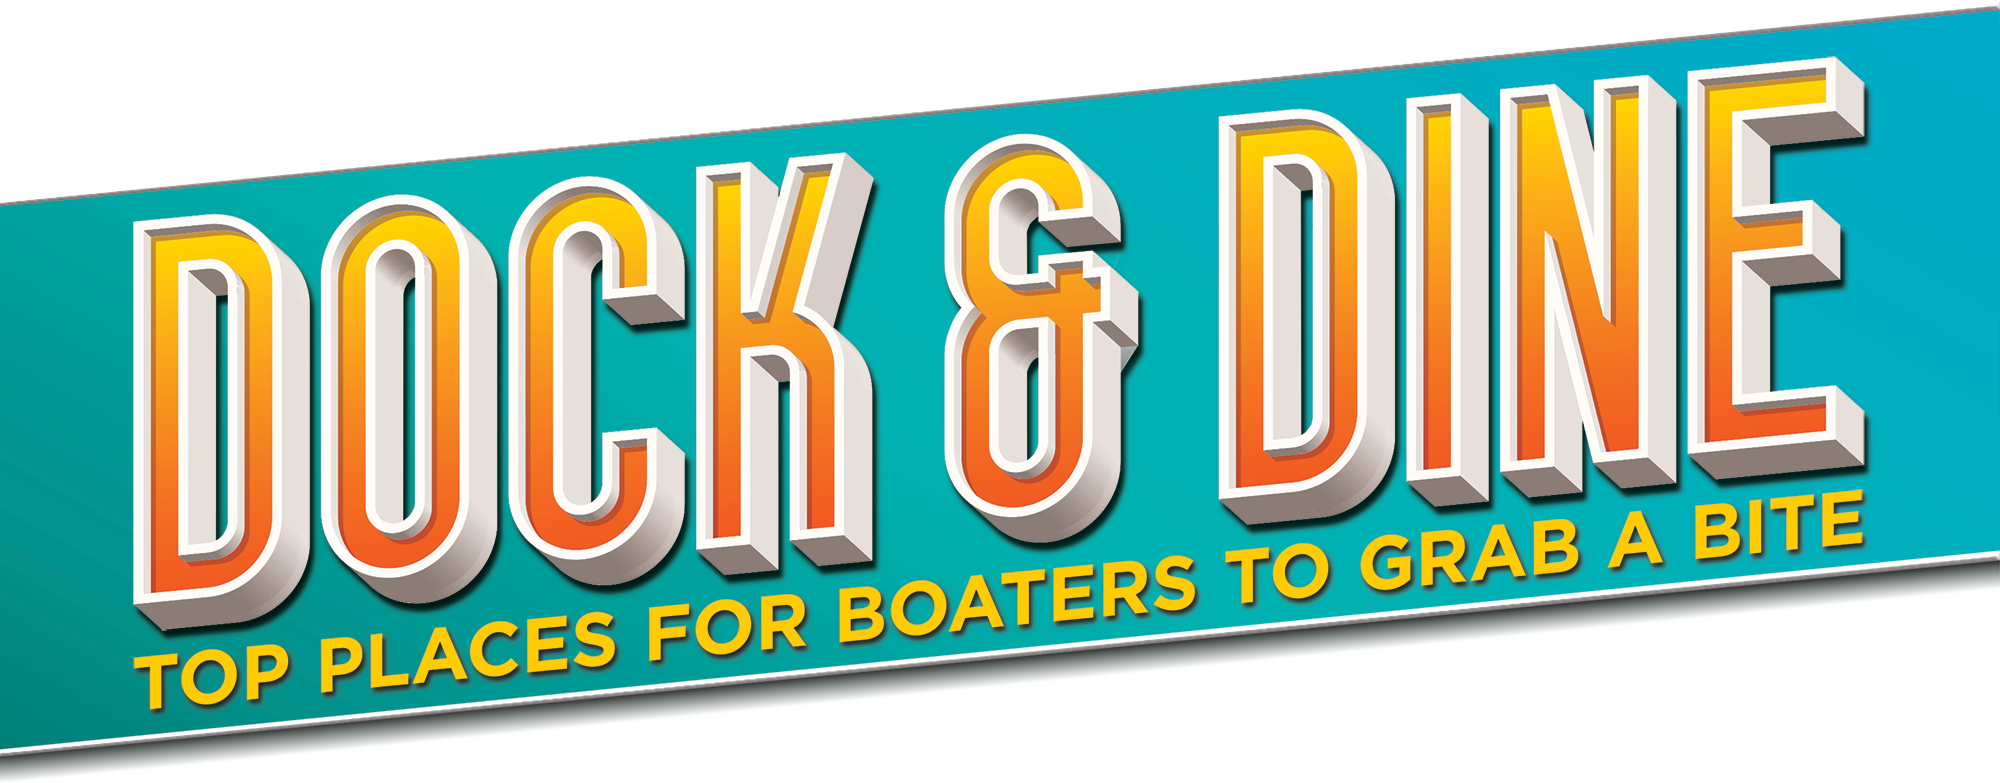 Dock & Dine: Top places for boaters to grab a bite